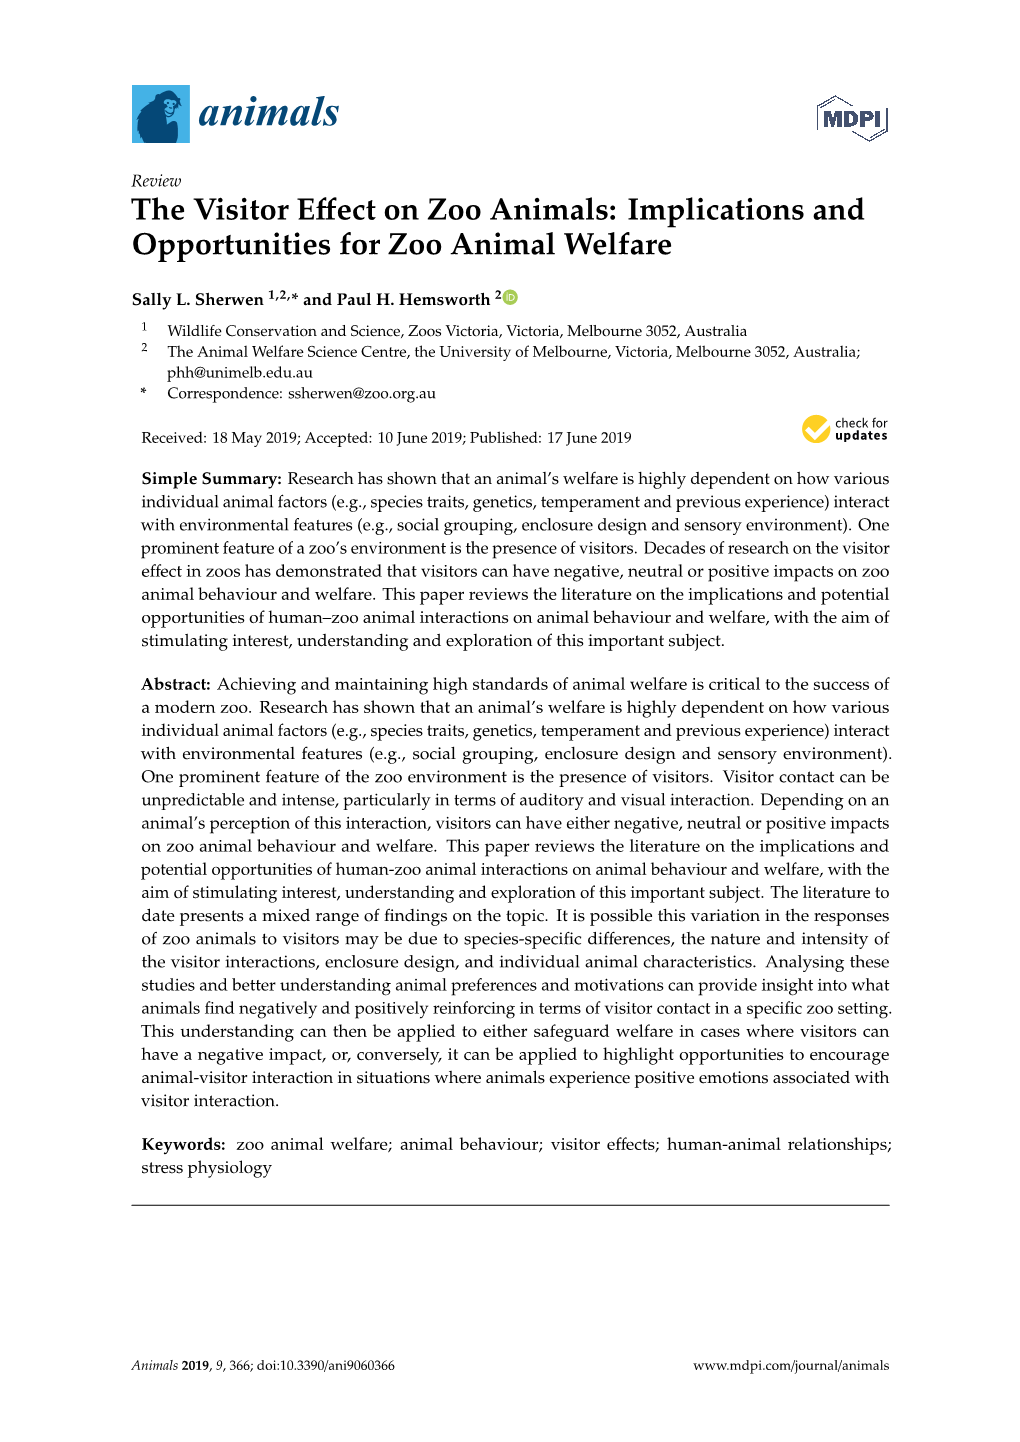 The Visitor Effect on Zoo Animals: Implications and Opportunities for Zoo Animal Welfare